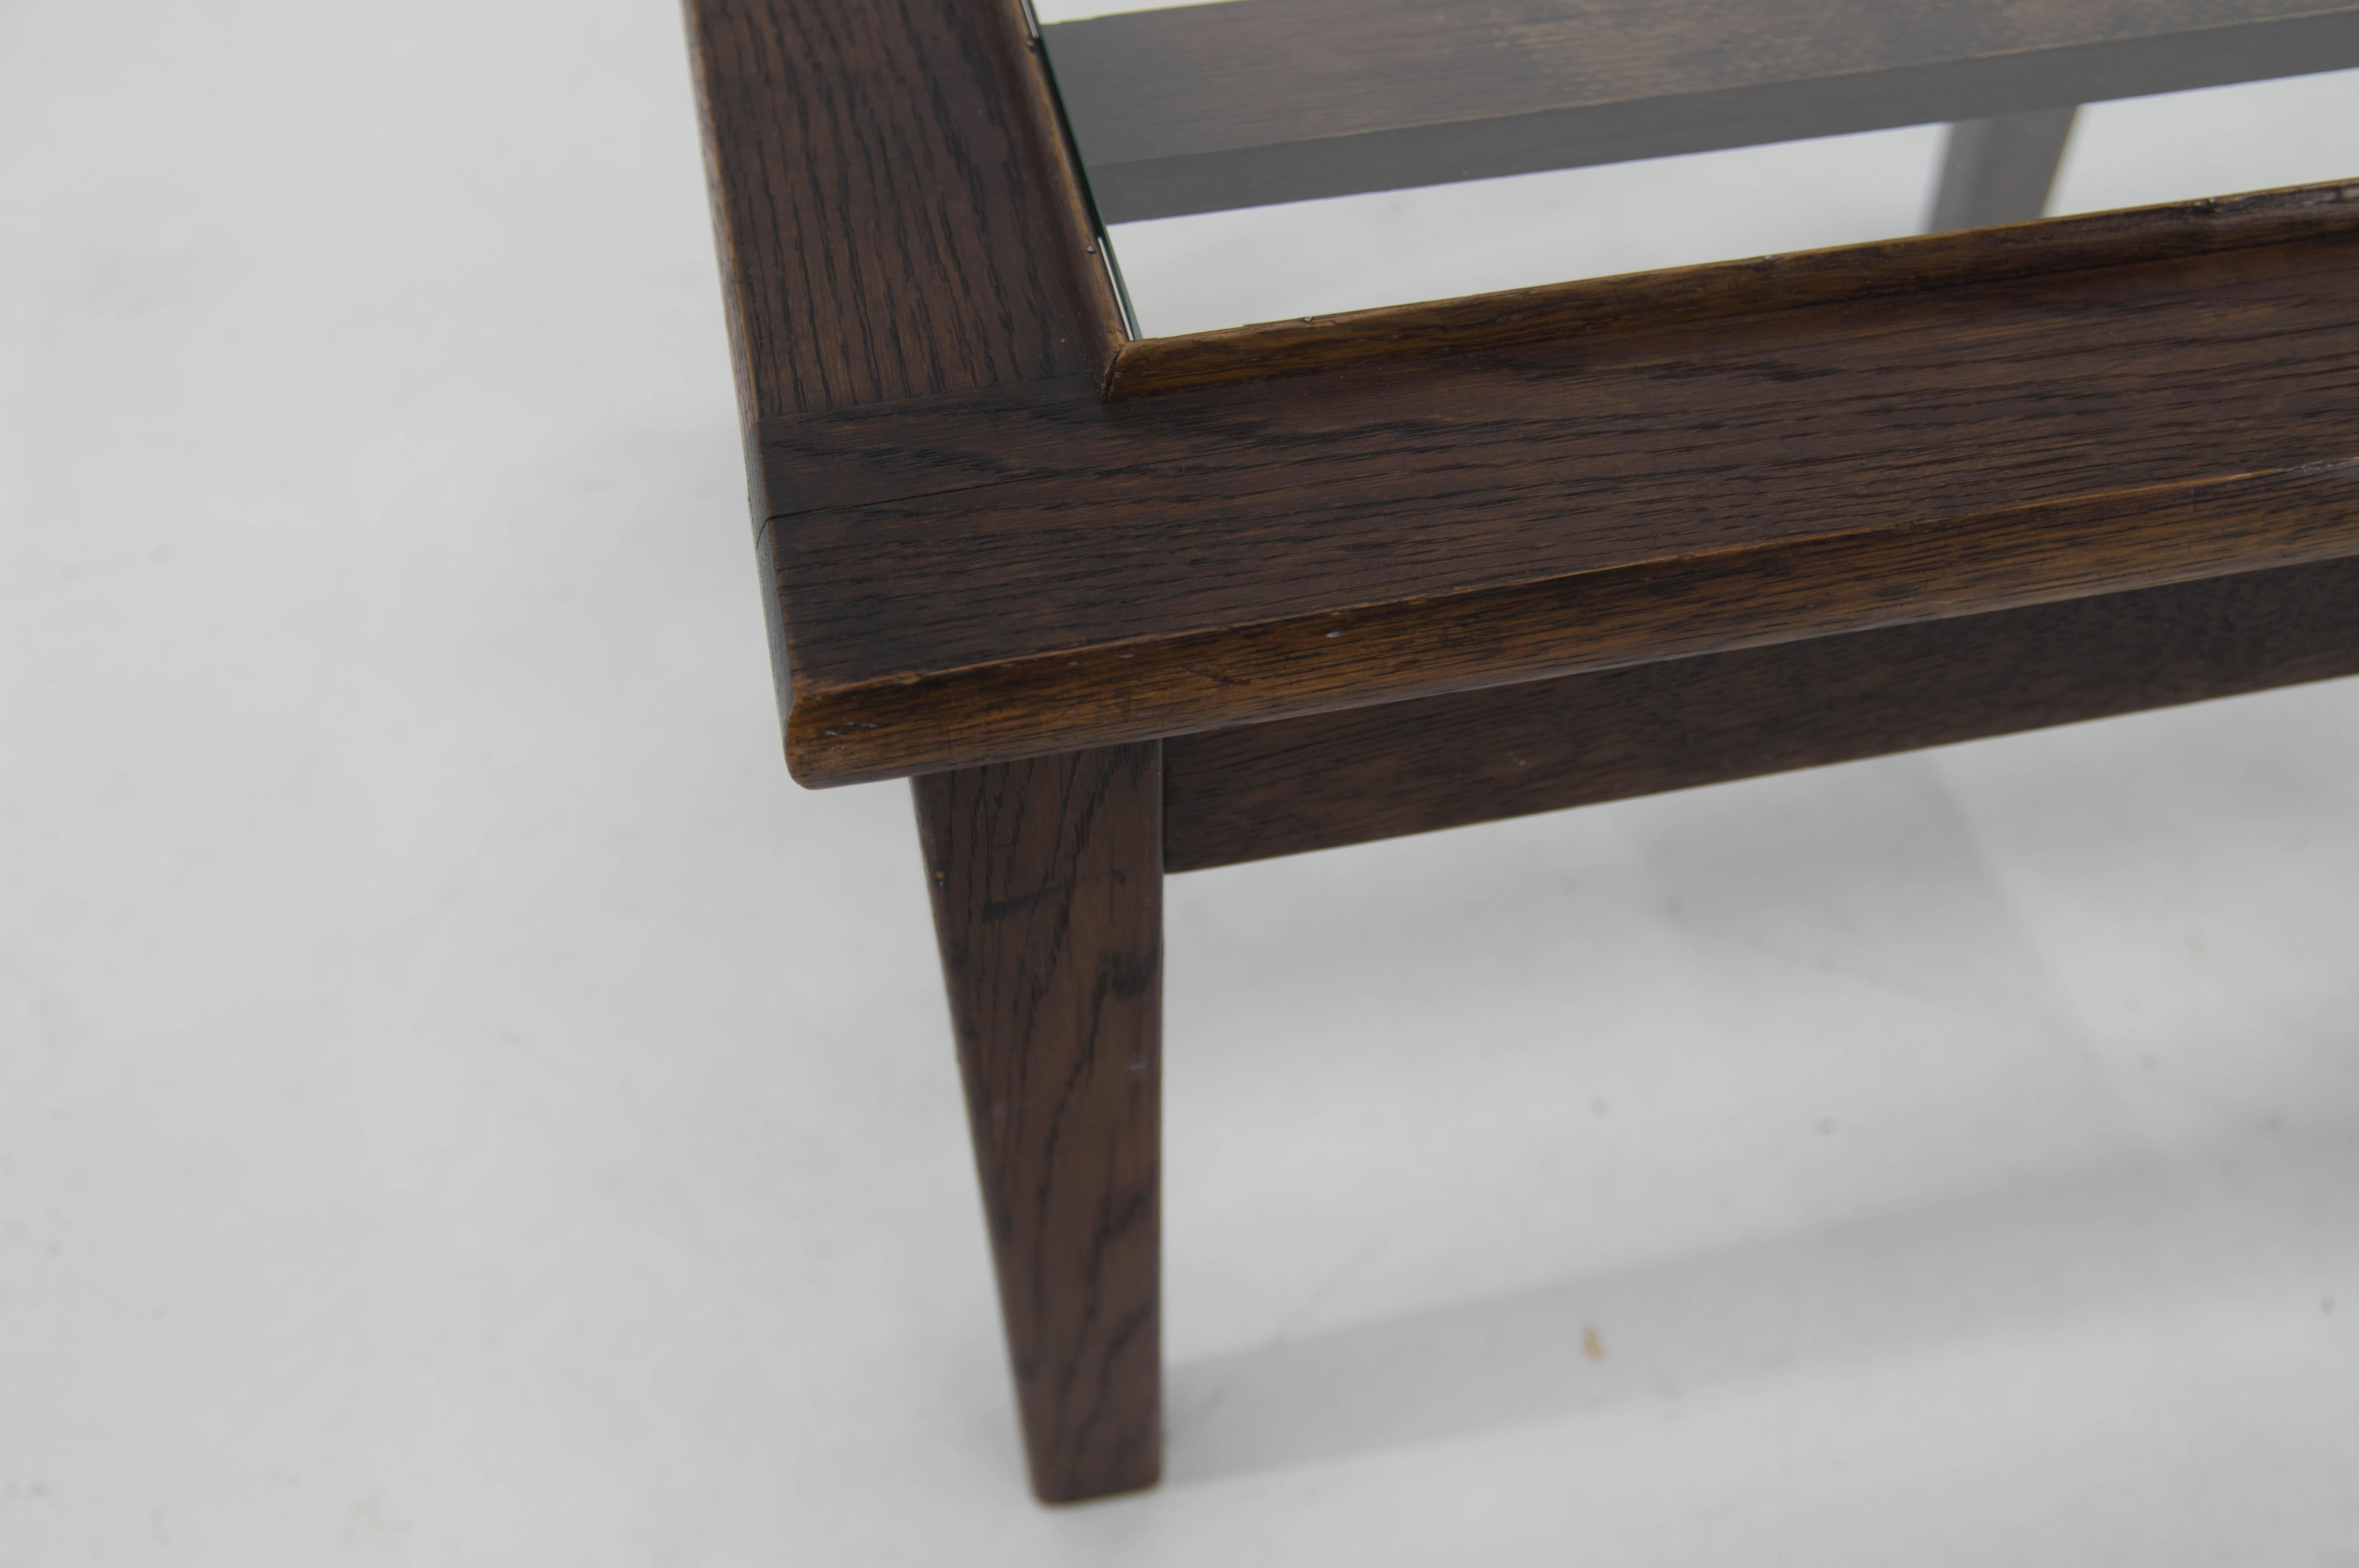 Beech Rare Functionalist Side Table by Antonin Heythum, 1930s For Sale